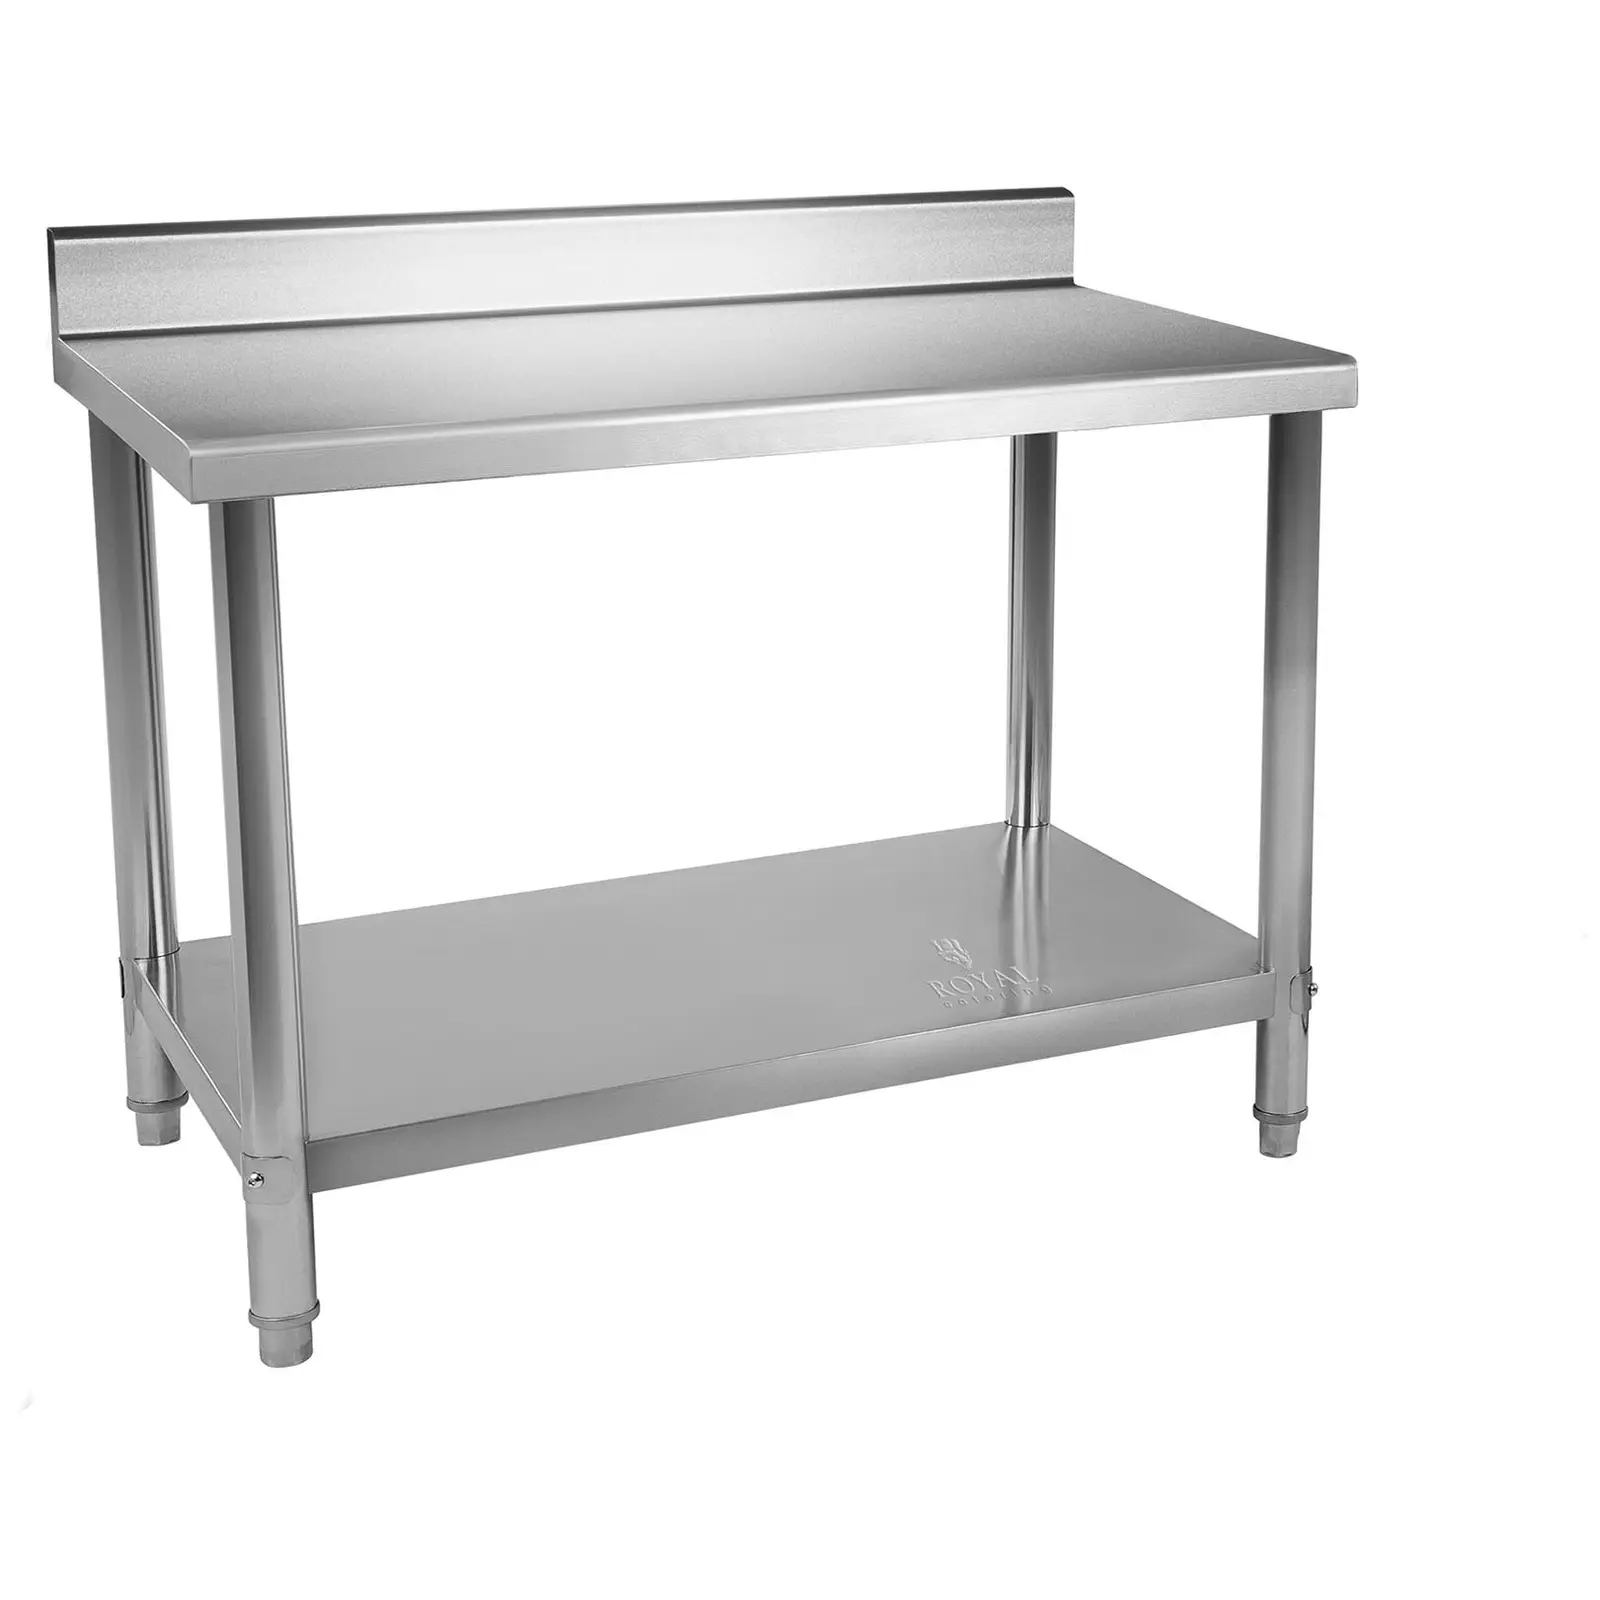 Stainless Steel Table - 150 x 60 cm - Upstand - 130 kg capacity